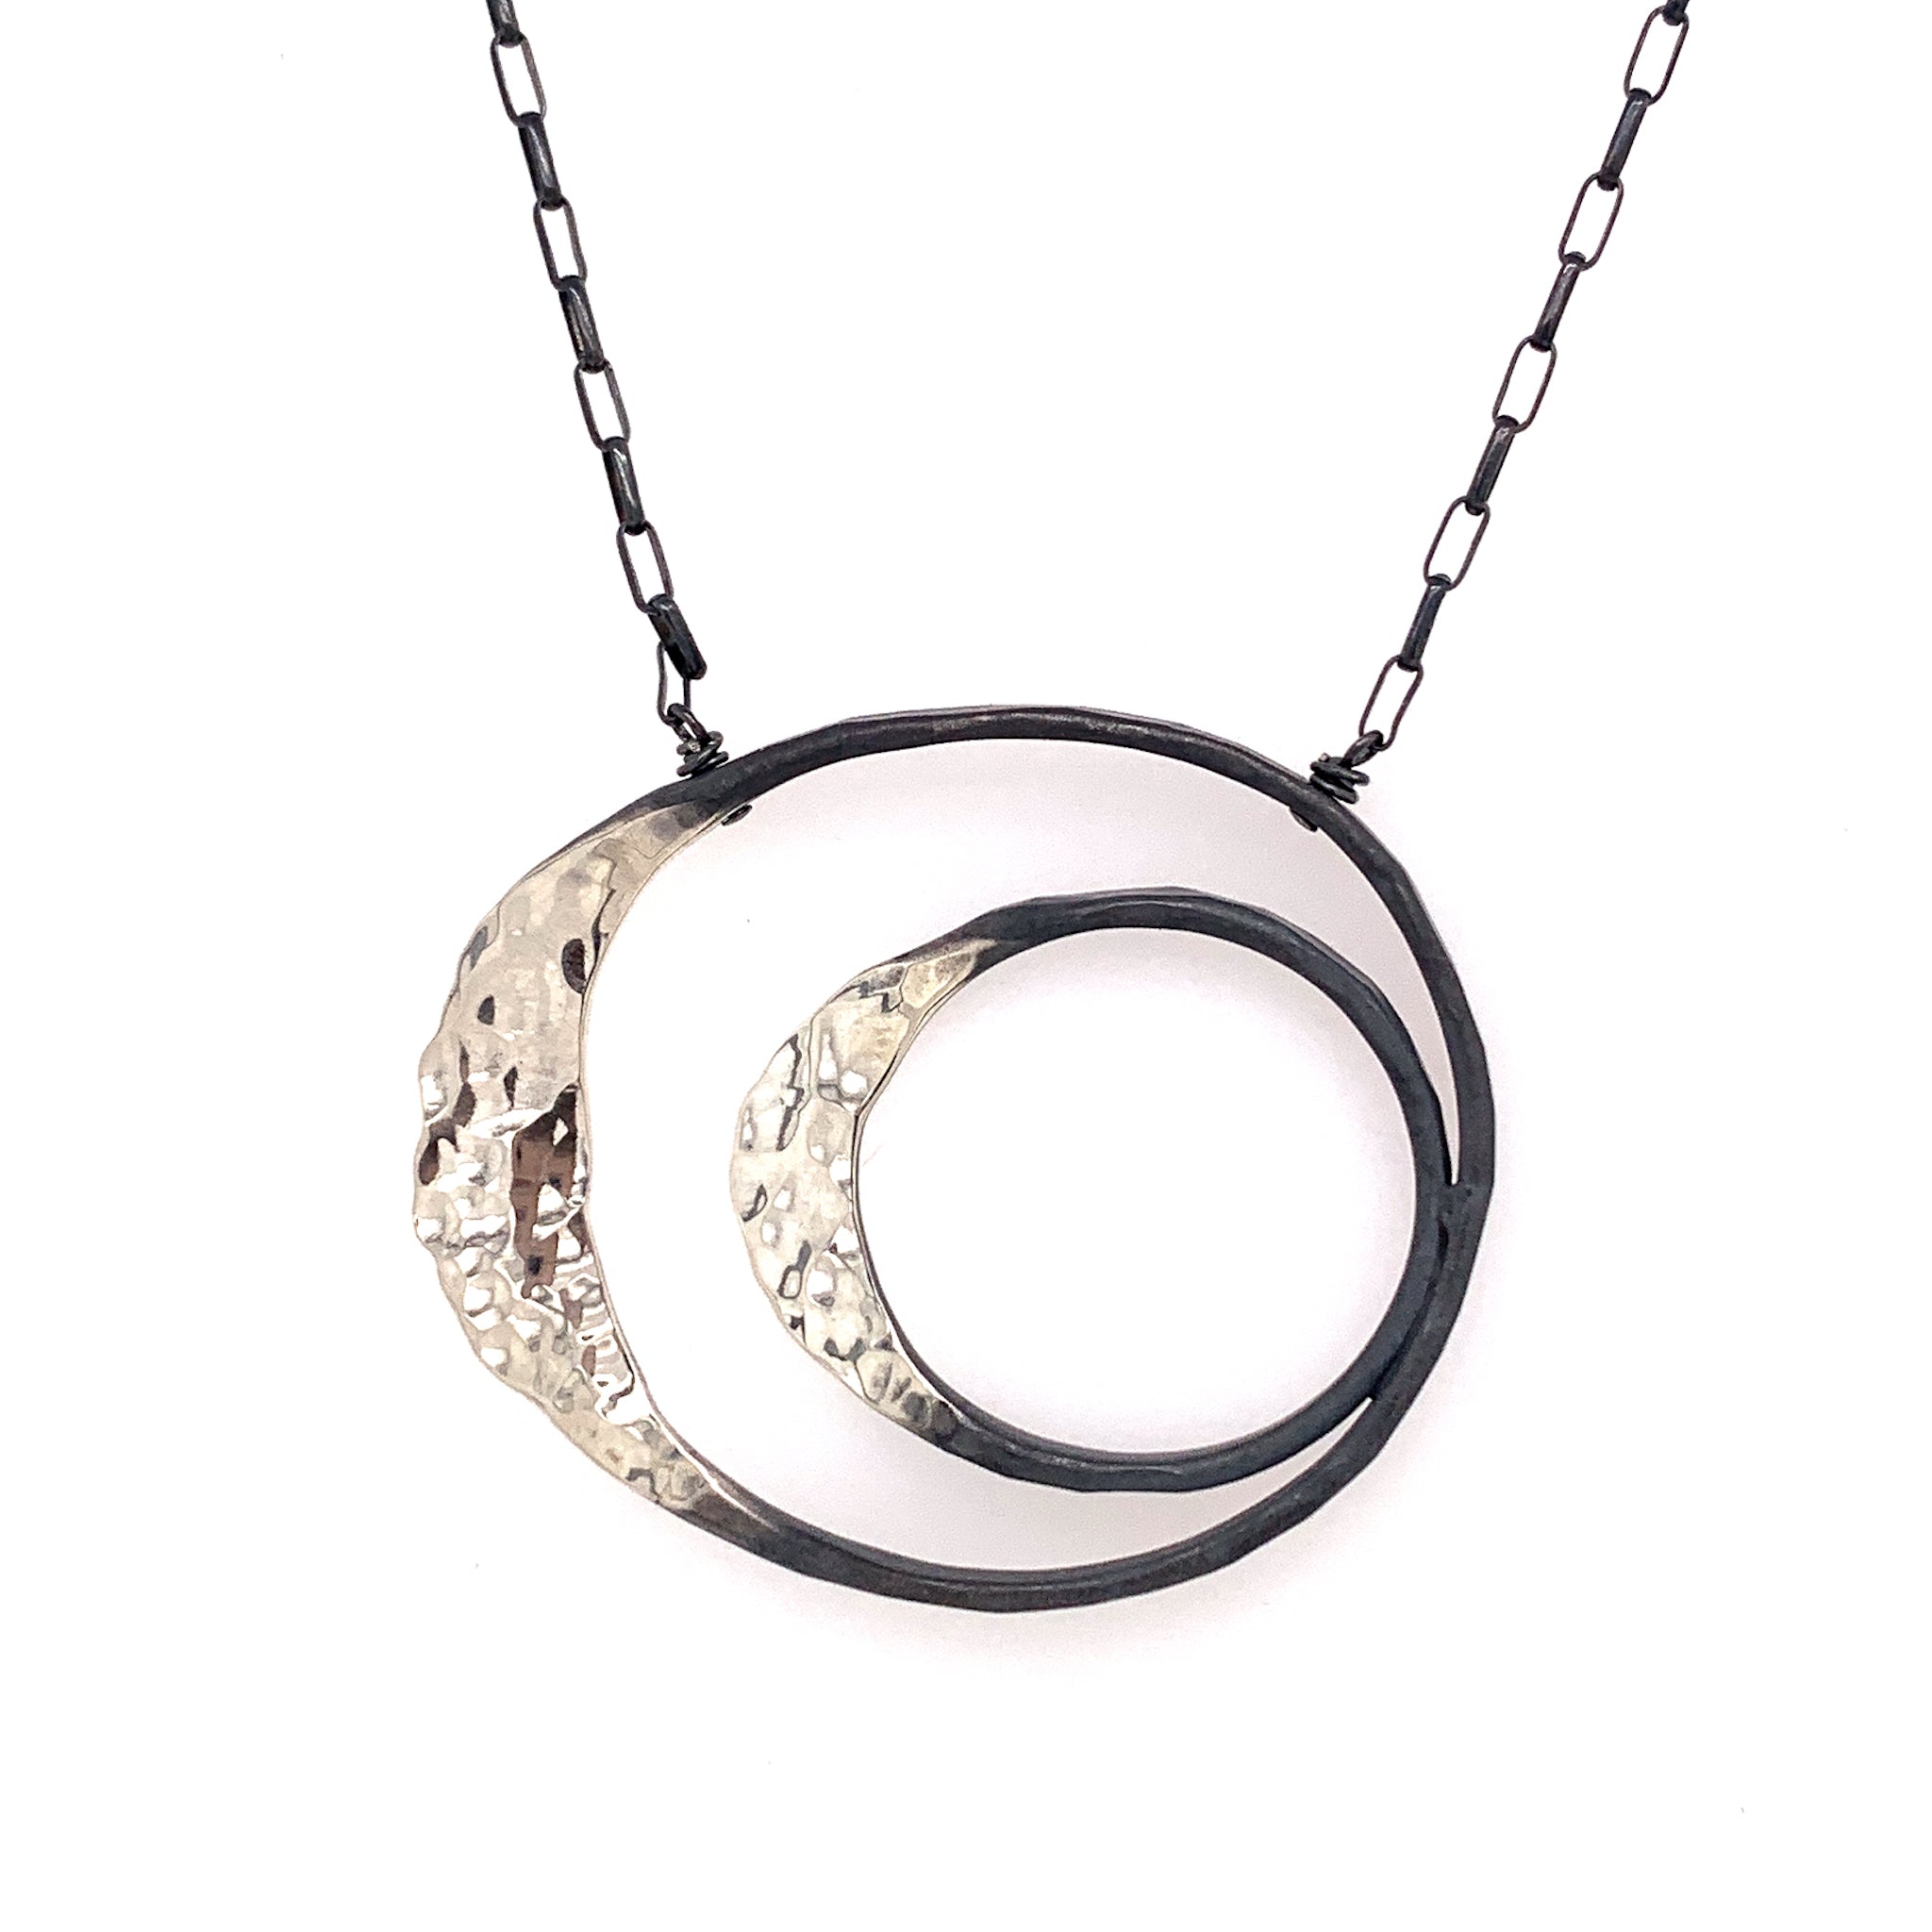 Small Double Satin Shiny Eclipse Necklace (N1859)